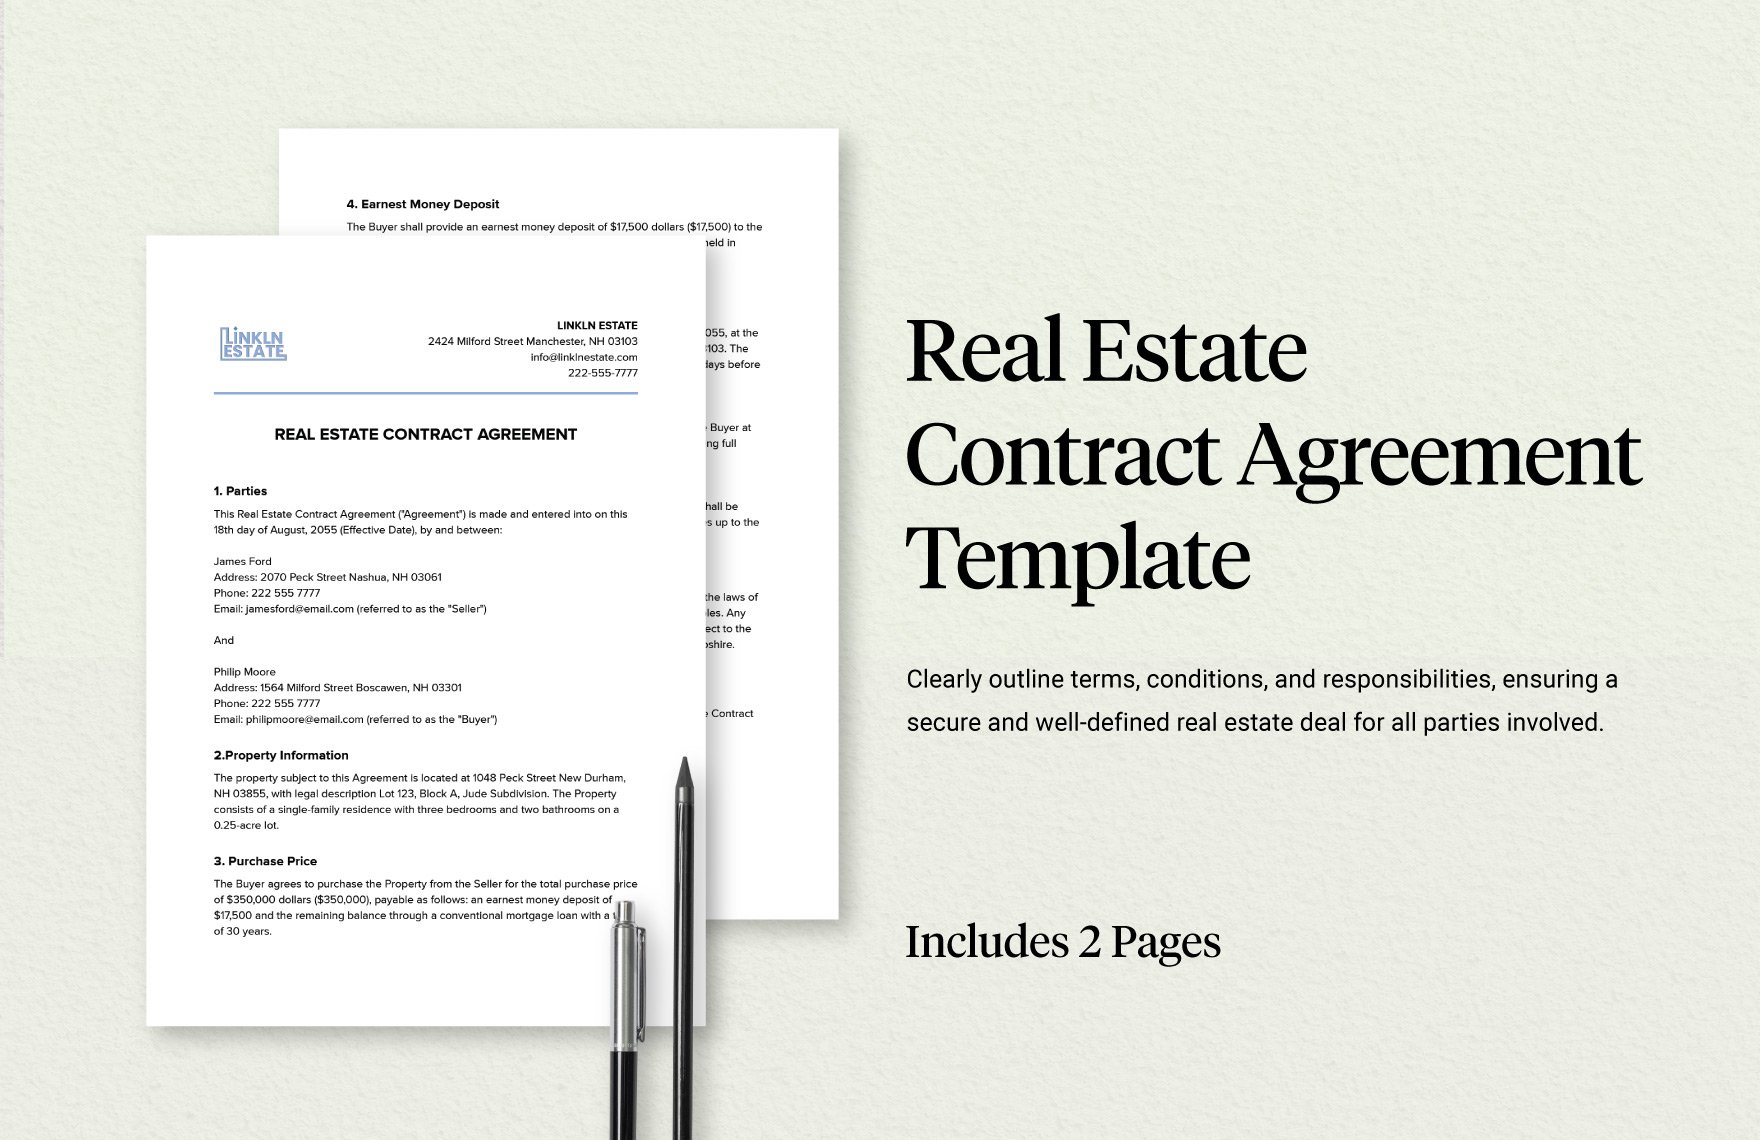 Real Estate Contract Agreement Template